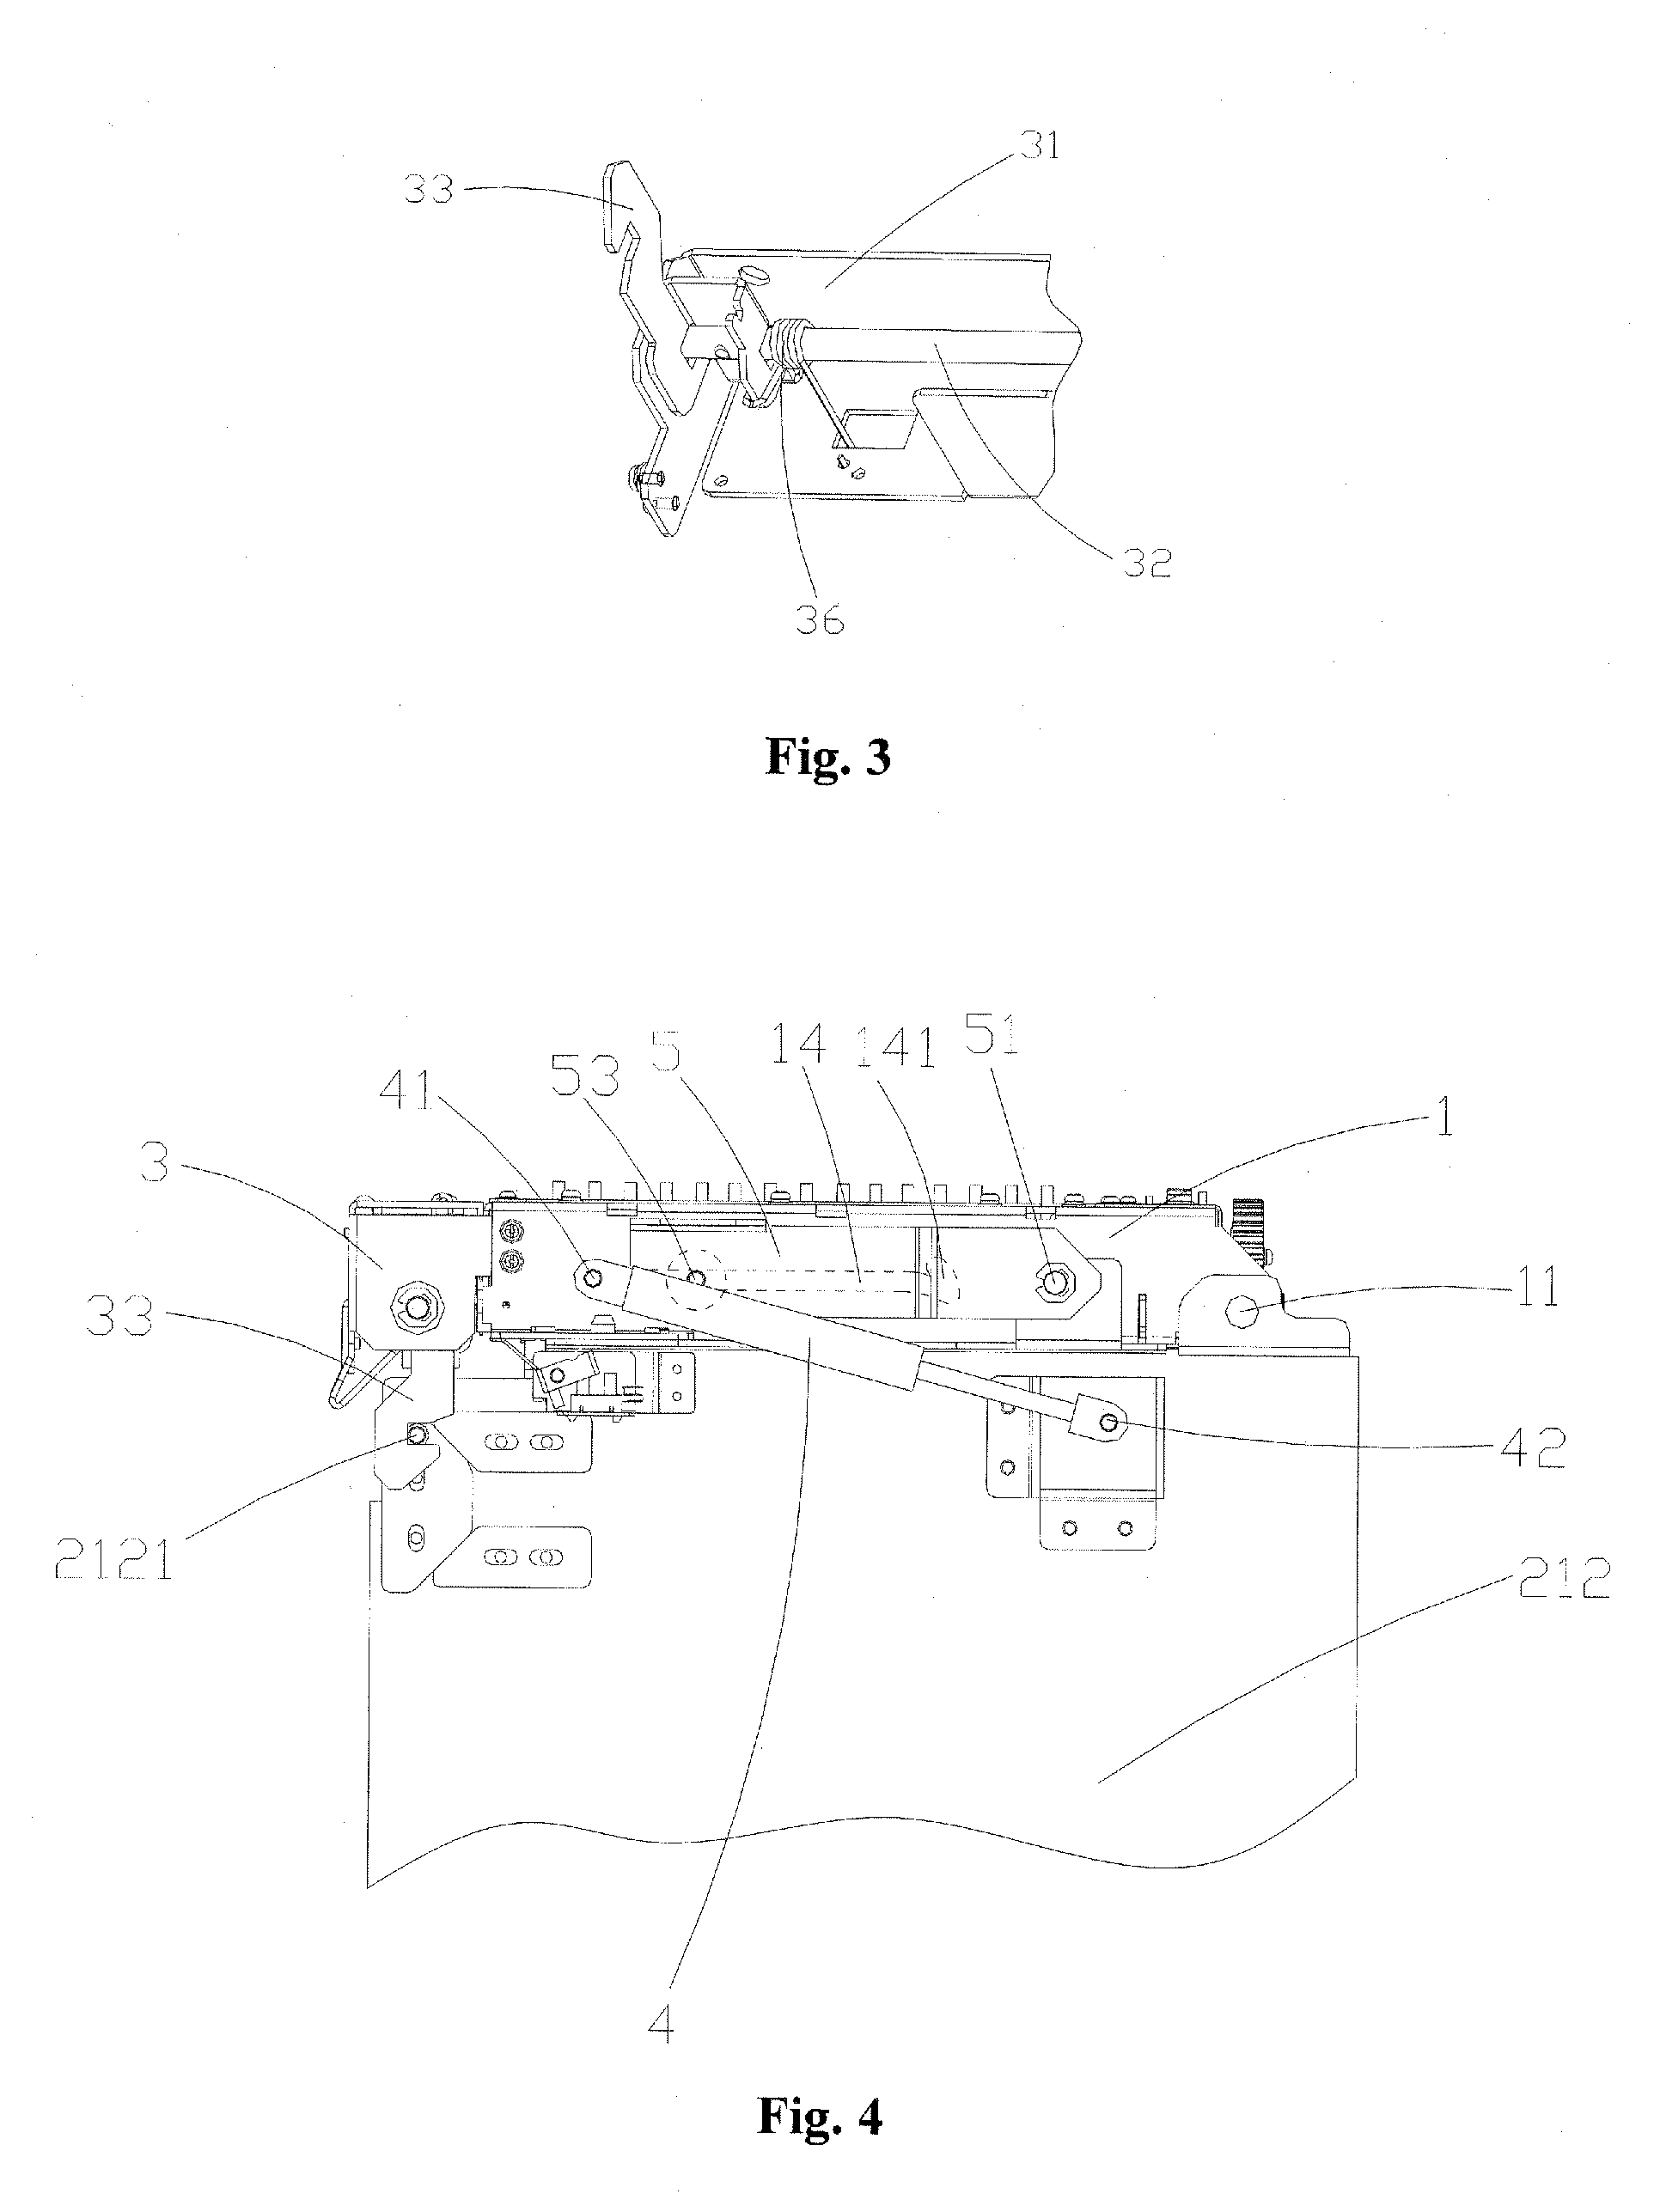 Paper money transmission and storage device